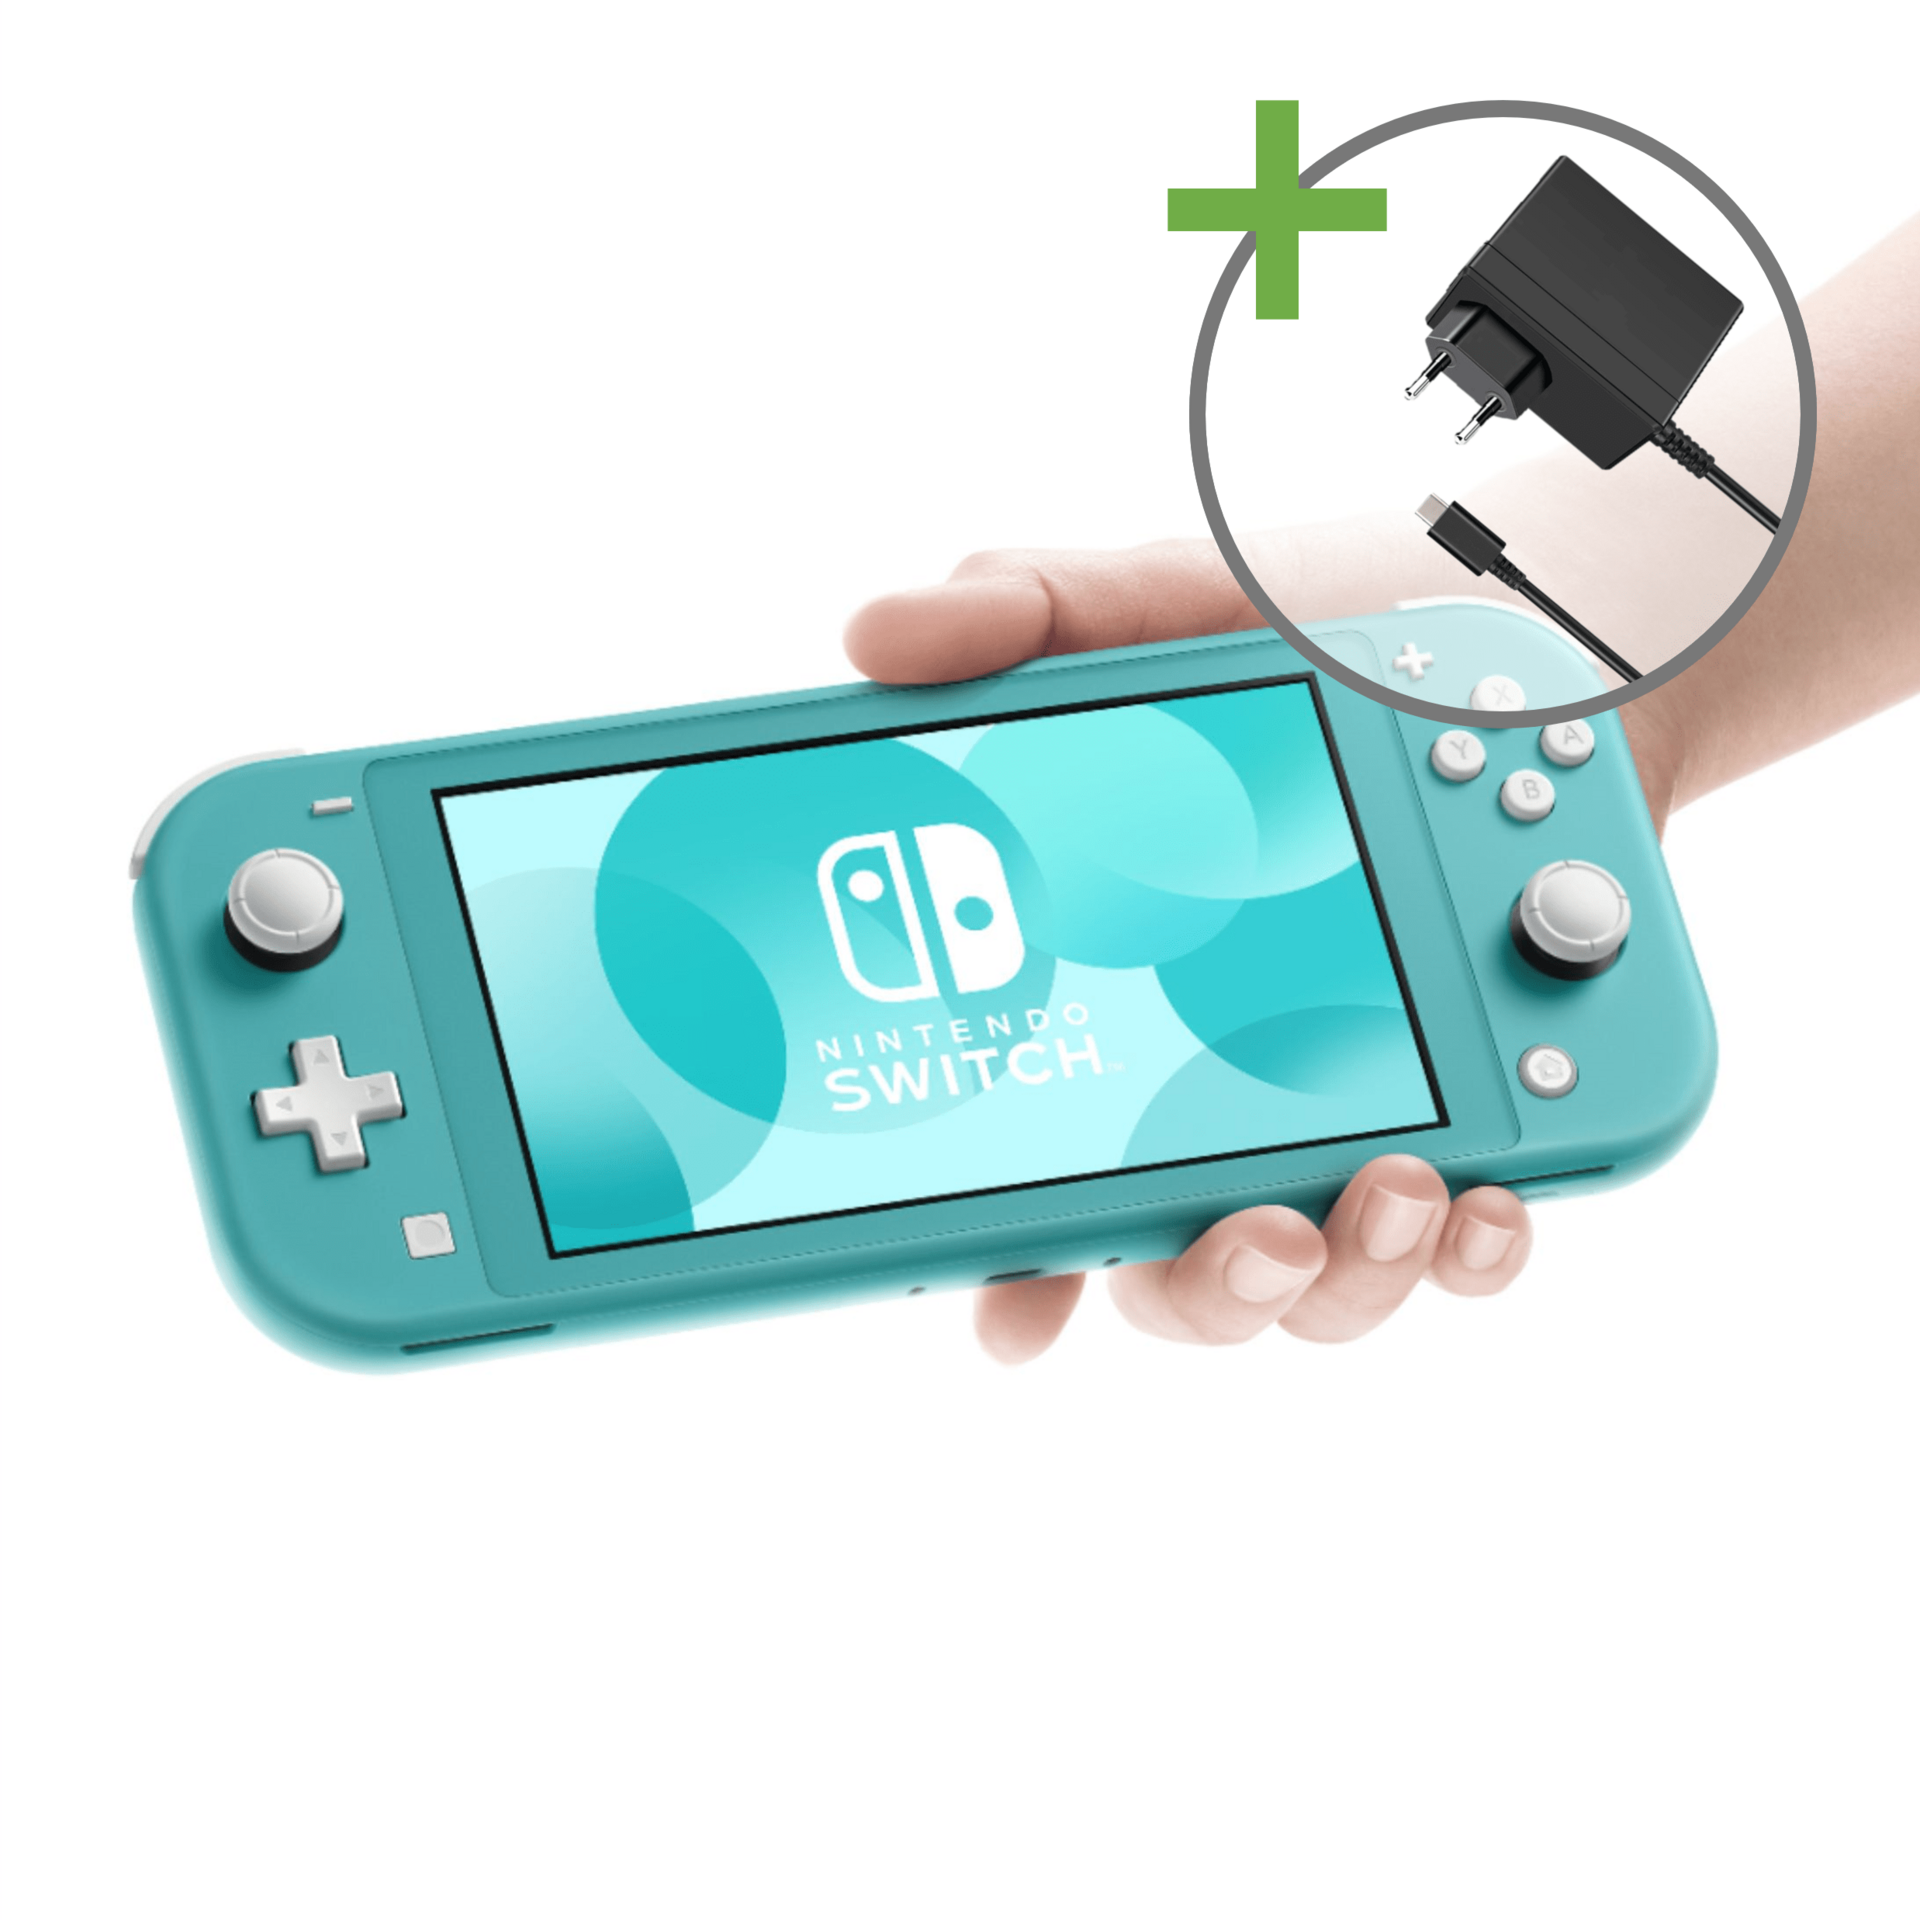 Nintendo Switch Lite Console - Turquoise [Complete] - Nintendo Switch Hardware - 3